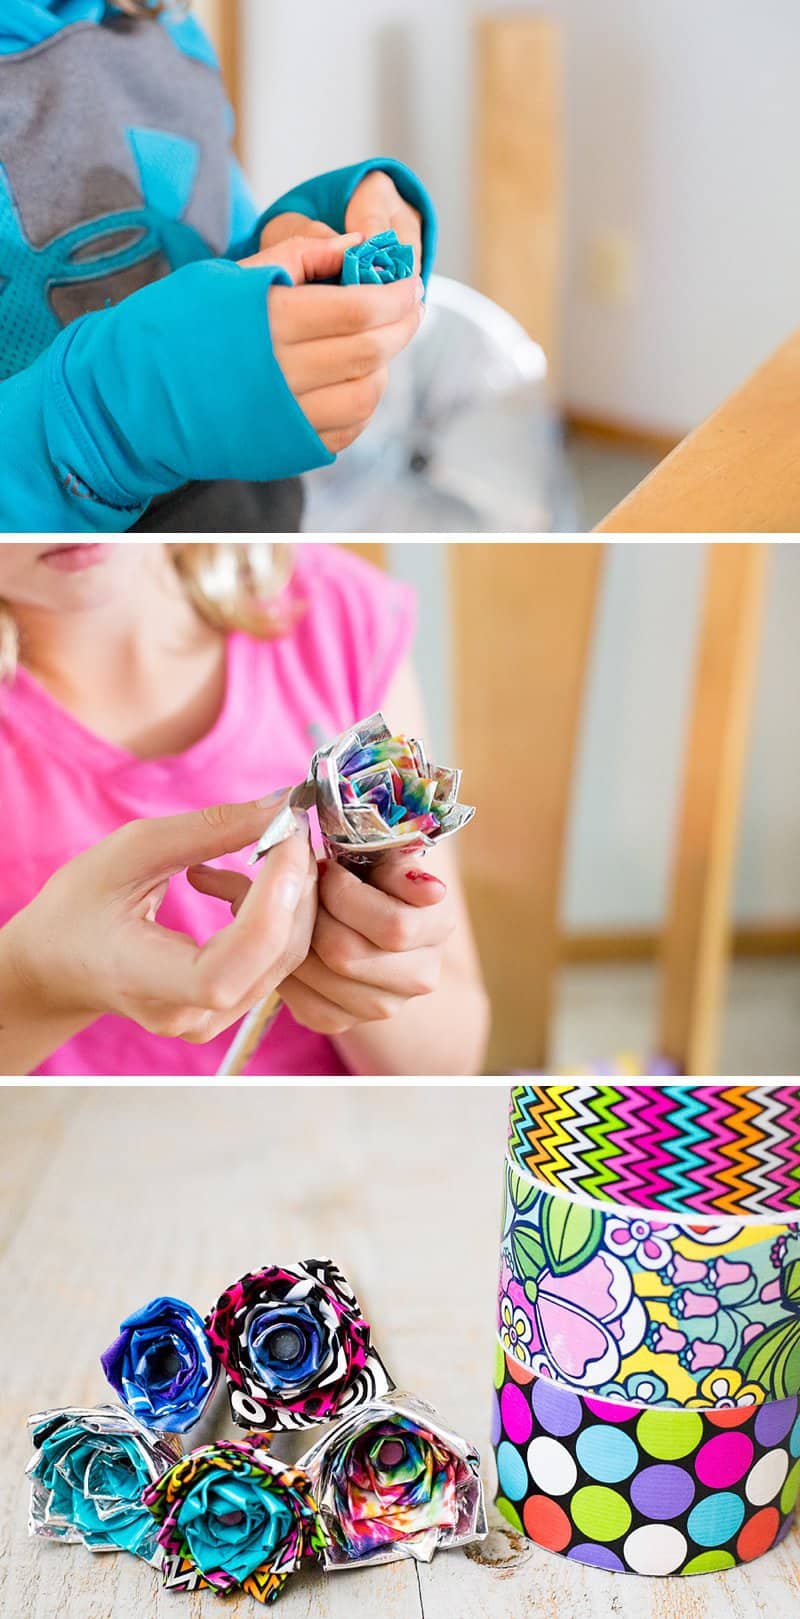 DIY Duct Tape Flower Pens — An Easy Video Tutorial for Kids by Kids *I never knew this was so simple. Saving this YouTube tutorial for the kids to do. Love that they have photo and video steps.